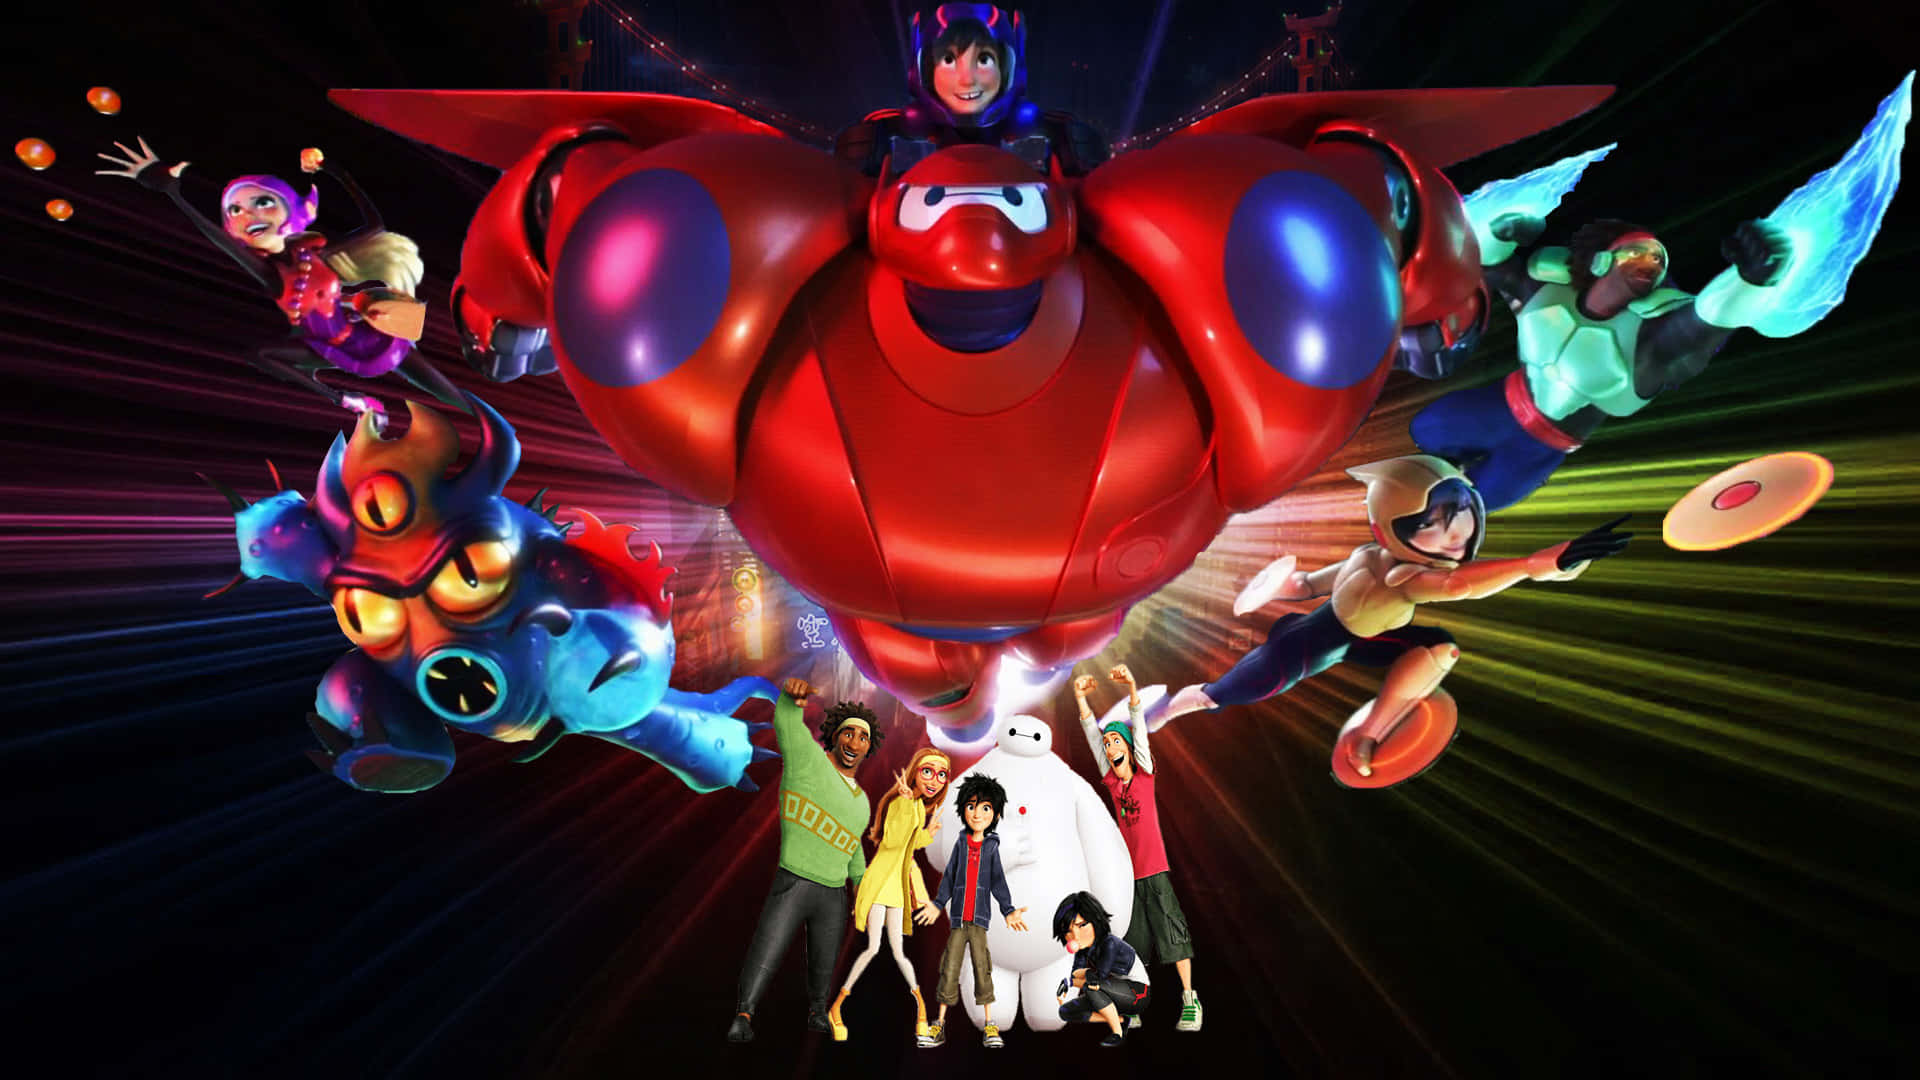 "Step up, suit up, don't mess up: The Big Hero 6 team is ready to fight!"